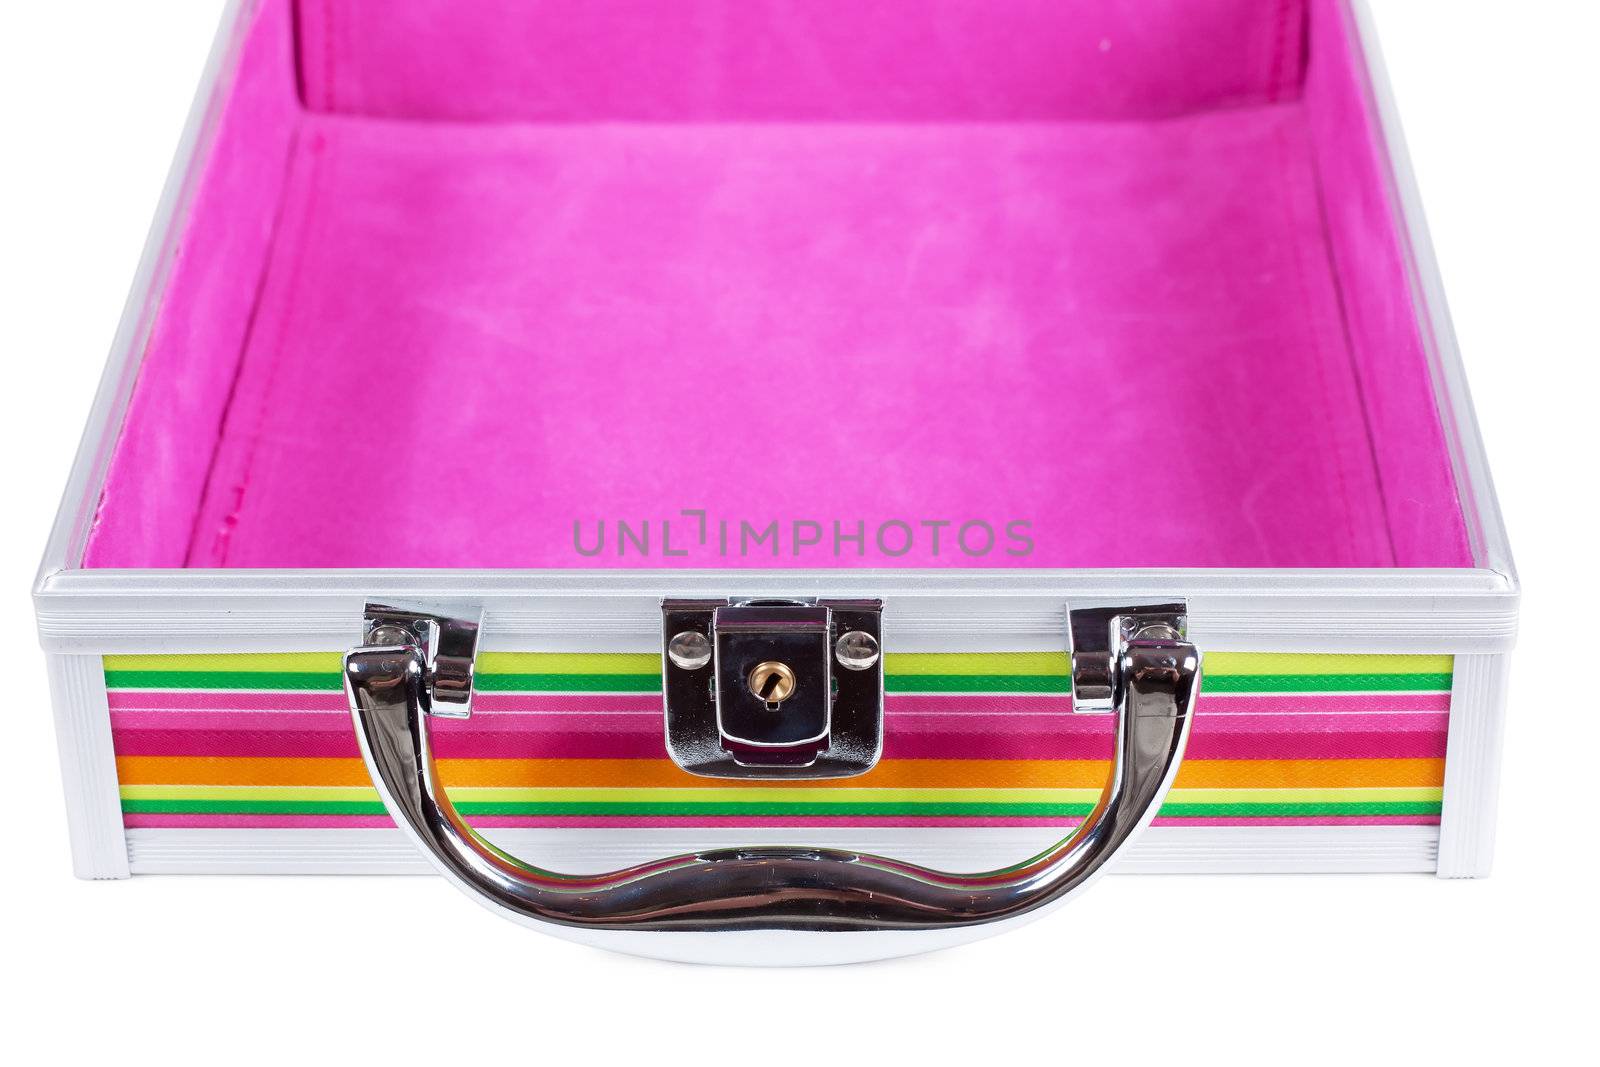 Colorful travel case isolated over white